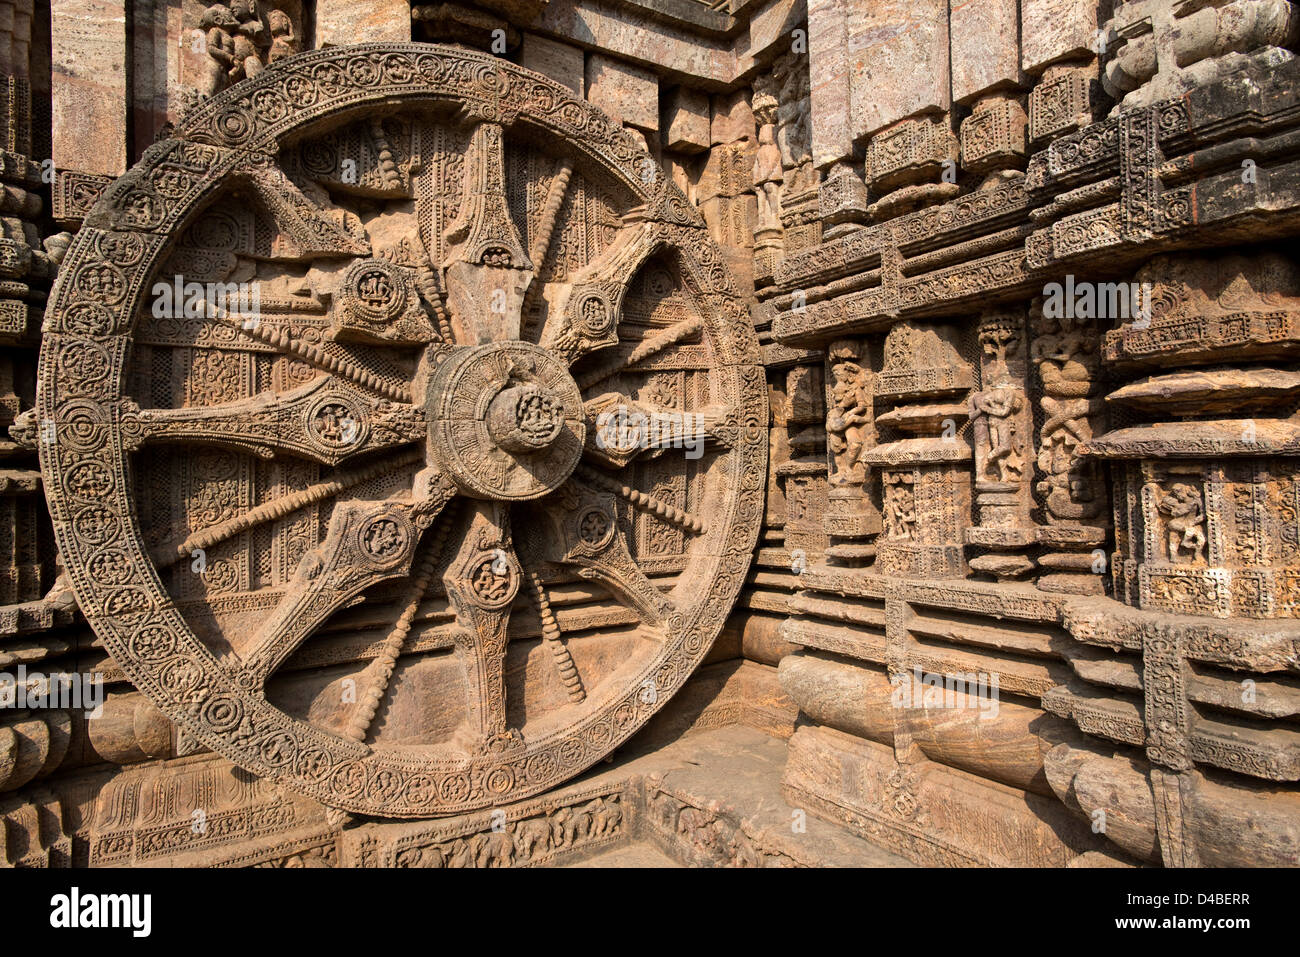 One of the iconic stone chariot wheels at the Sun Temple at Konark, near Puri, in Odisha state, India Stock Photo